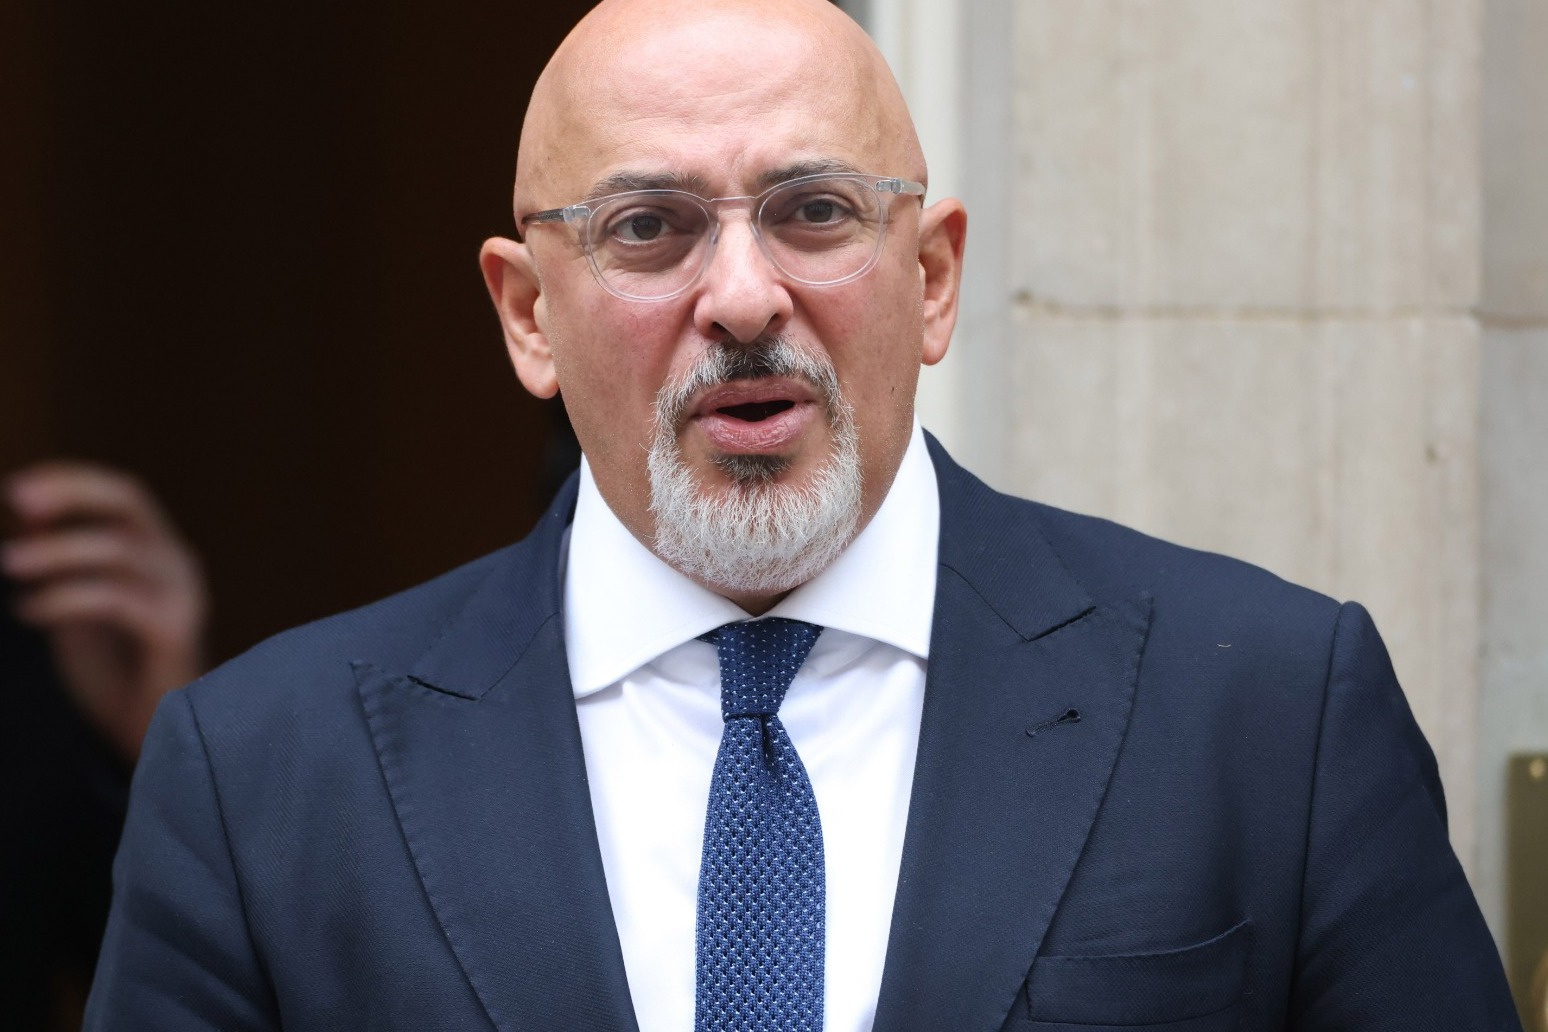 Nadhim Zahawi says there are no excuses for online learning at universities